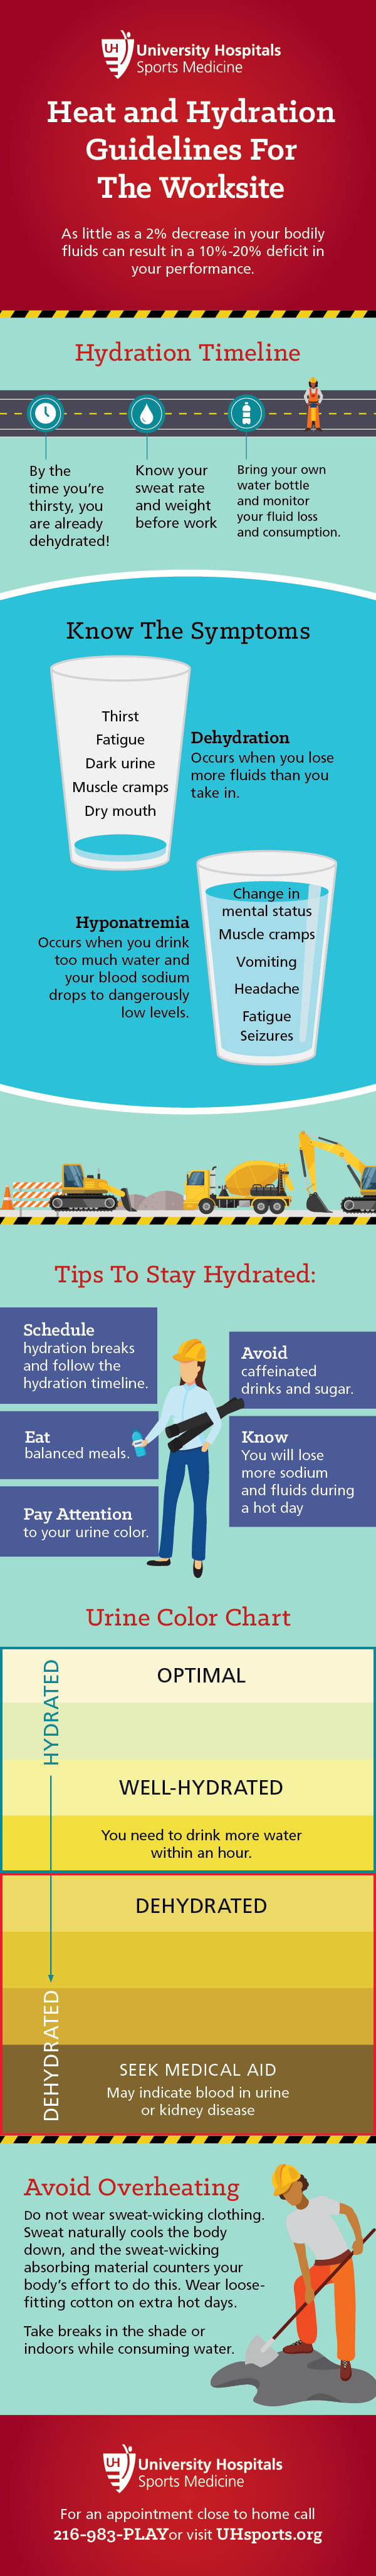 tips for hydration